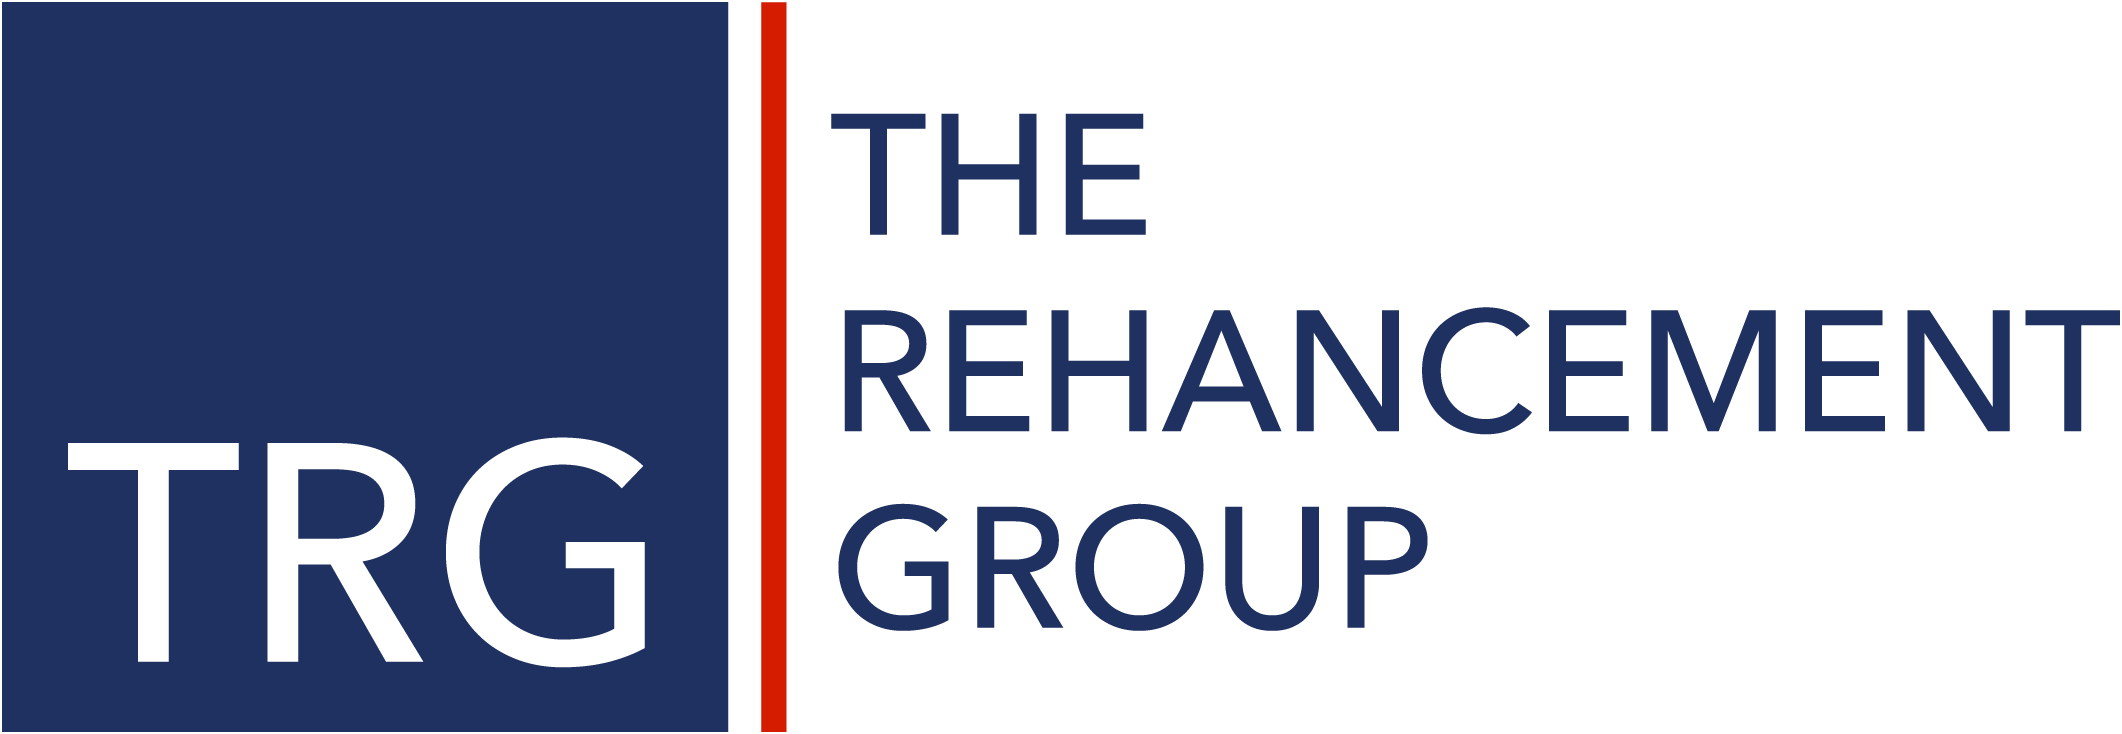 The Rehancement Group